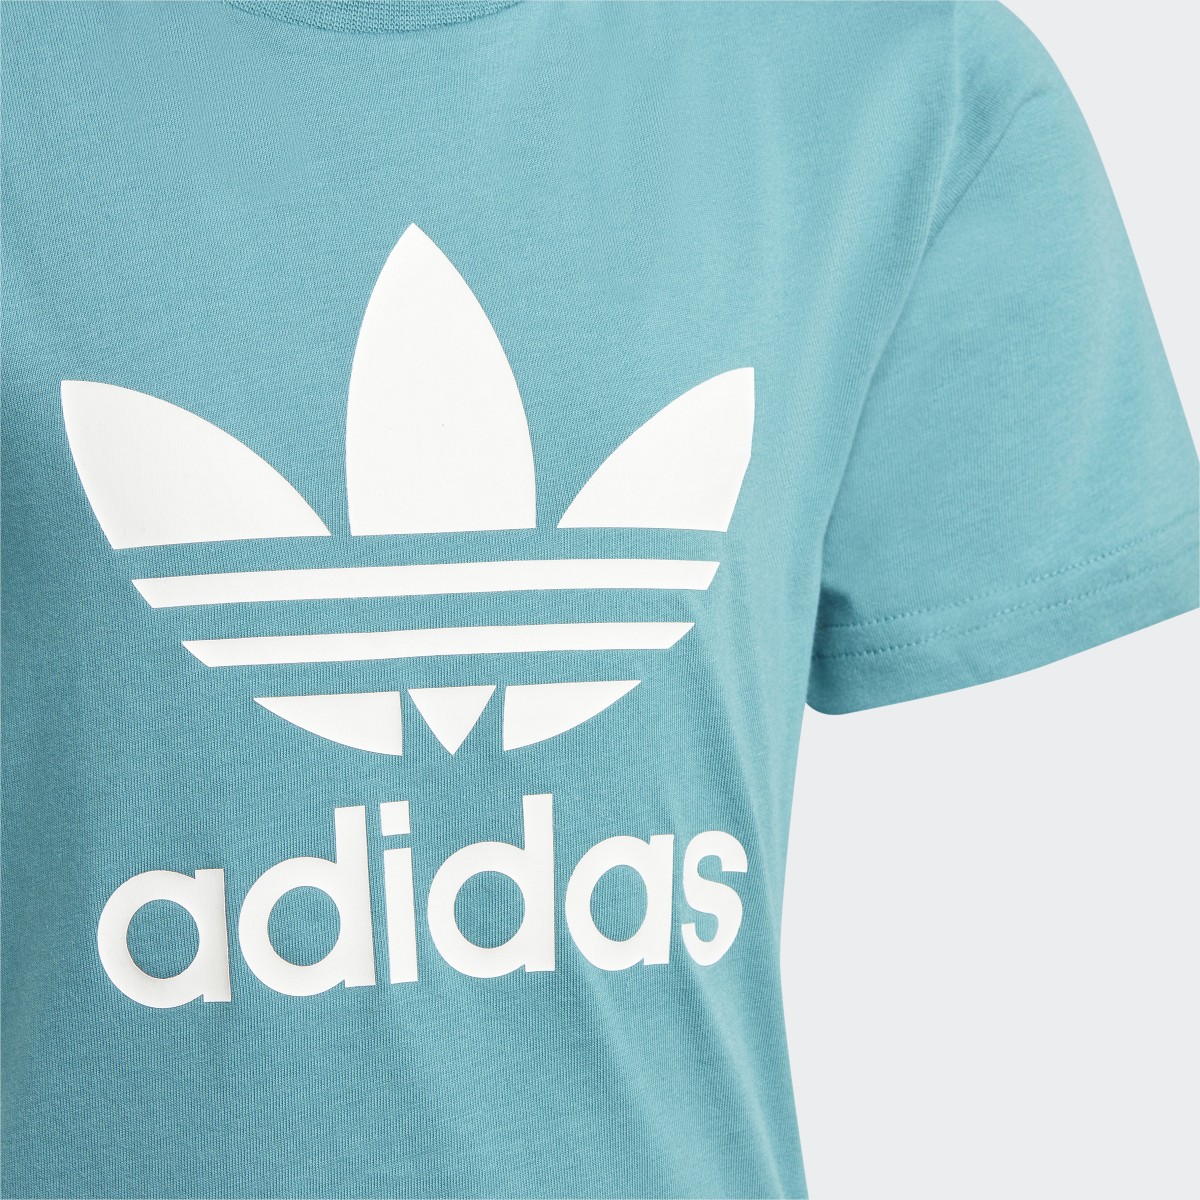 Adidas Completo adicolor Shorts and Tee. 9